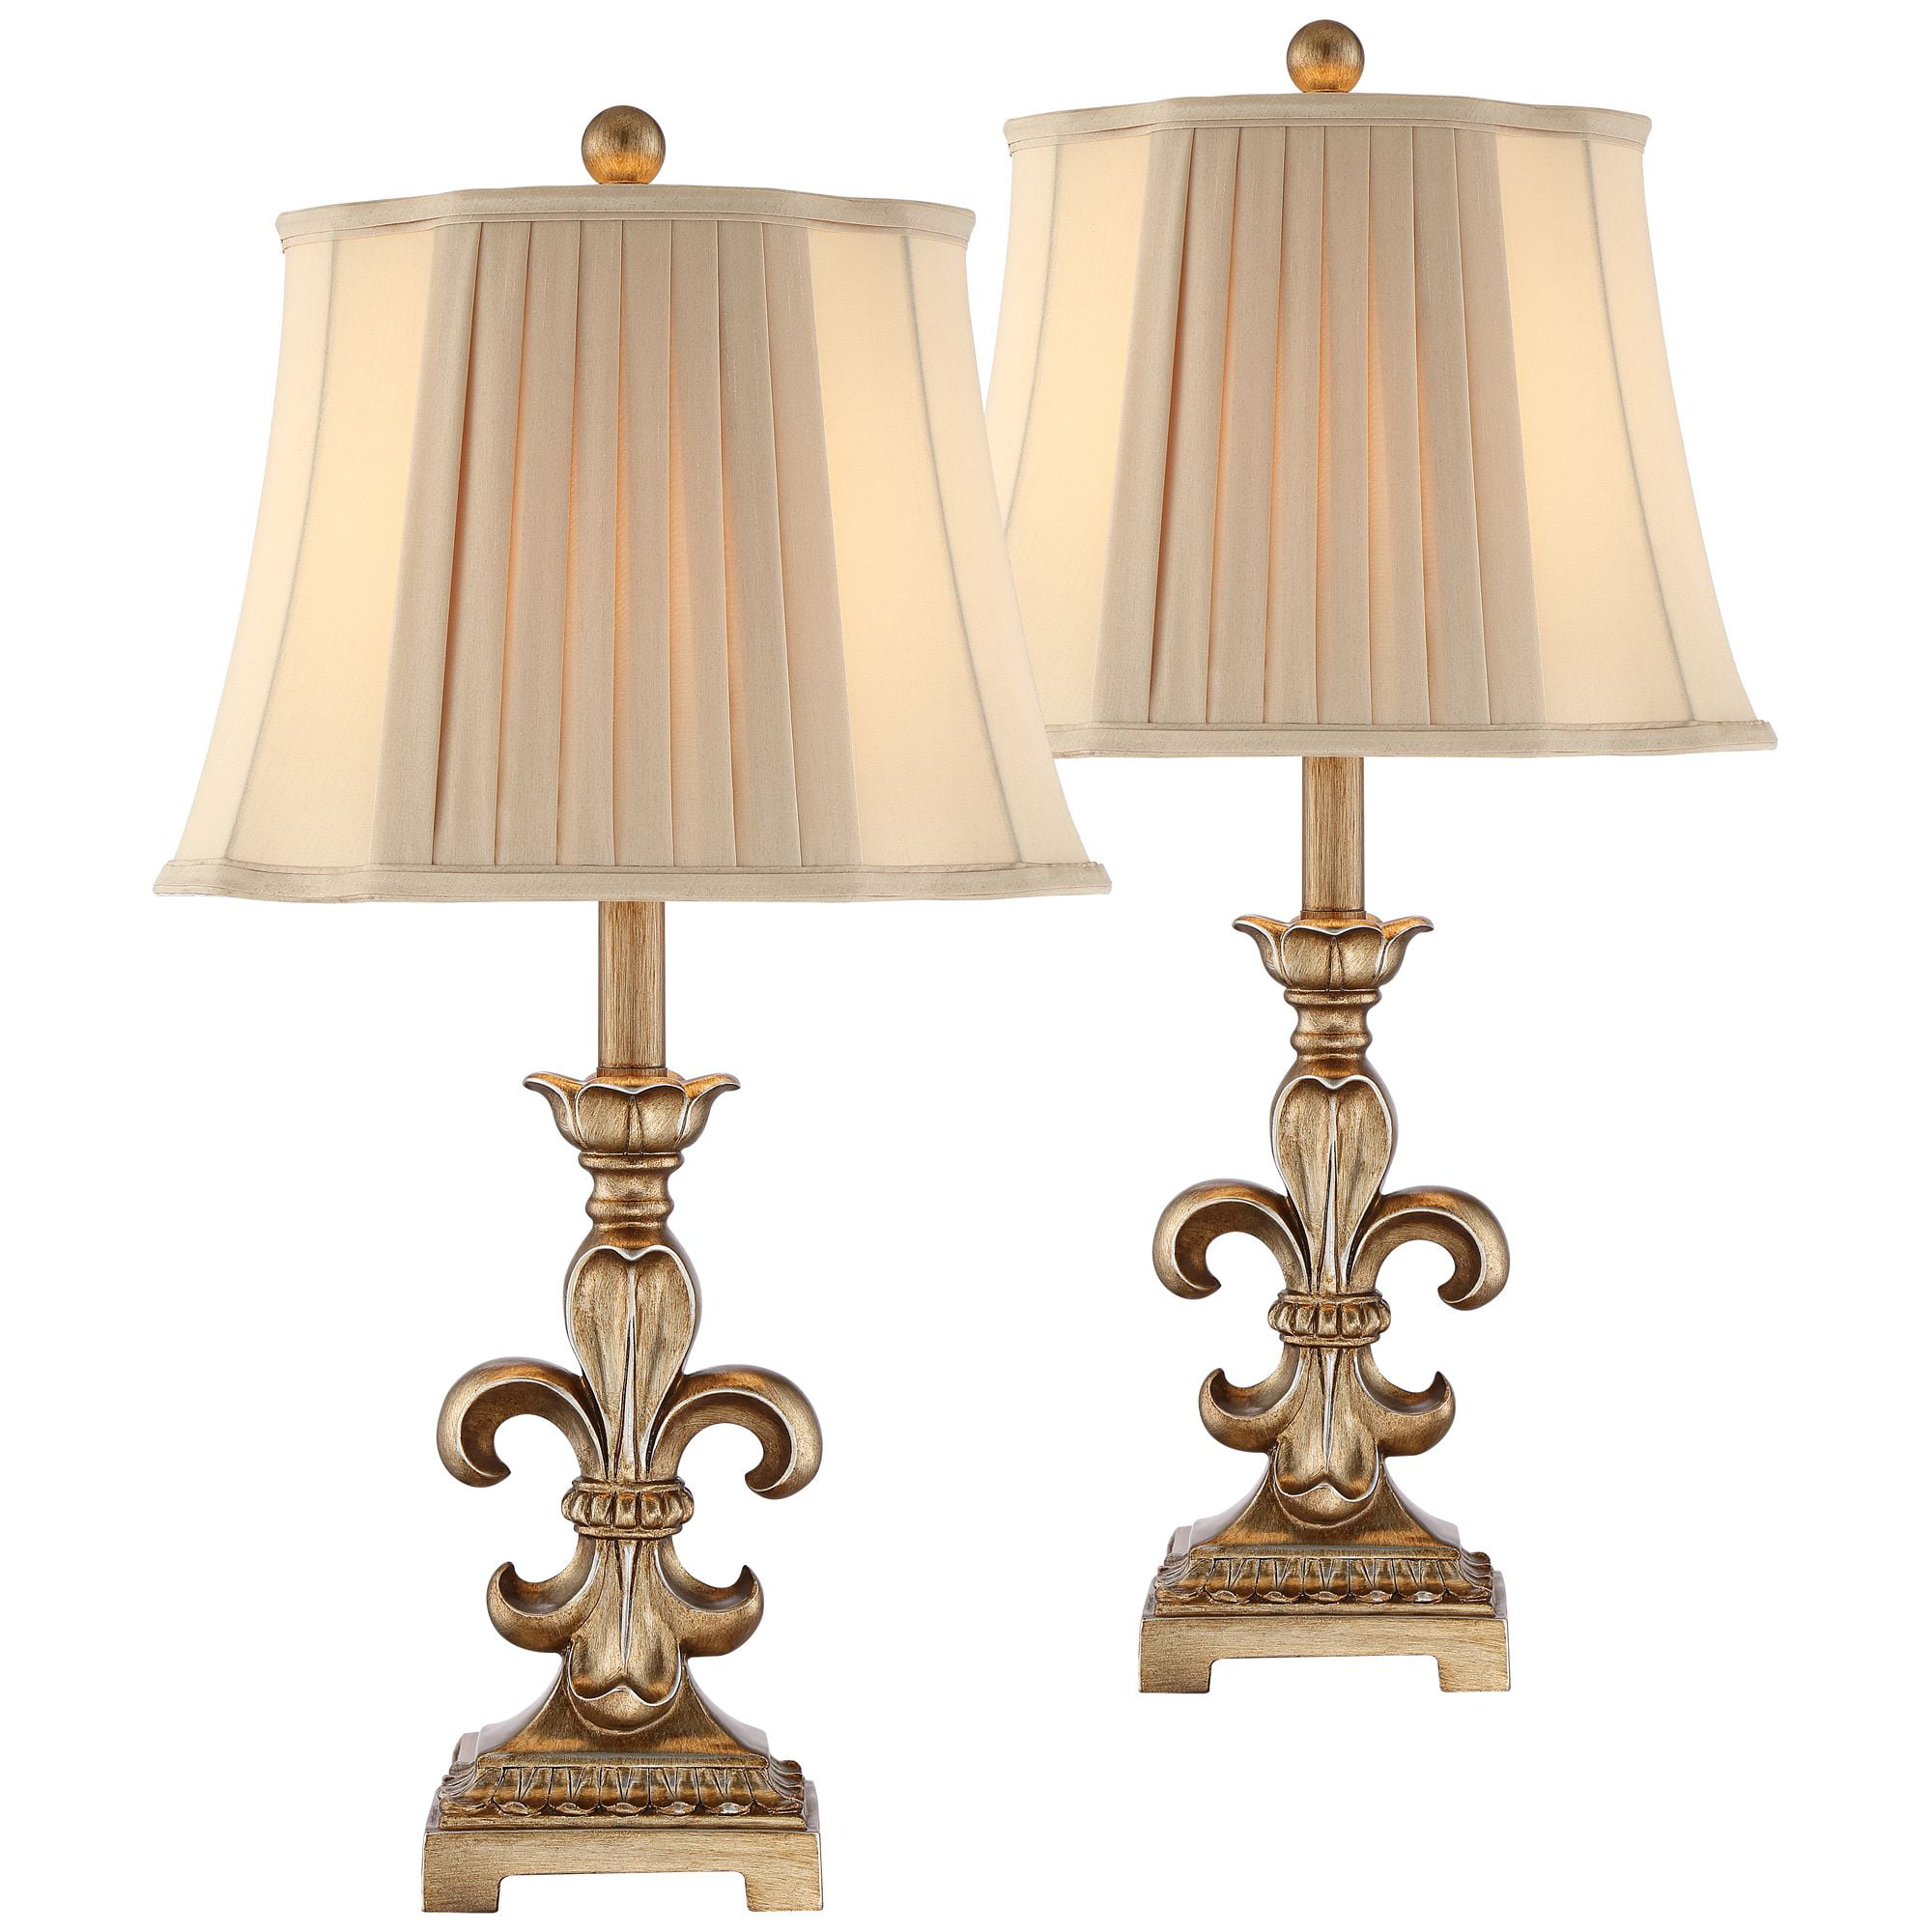 Regency Hill Traditional Table Lamps Set of 2 Antique Gold Pleated Bell